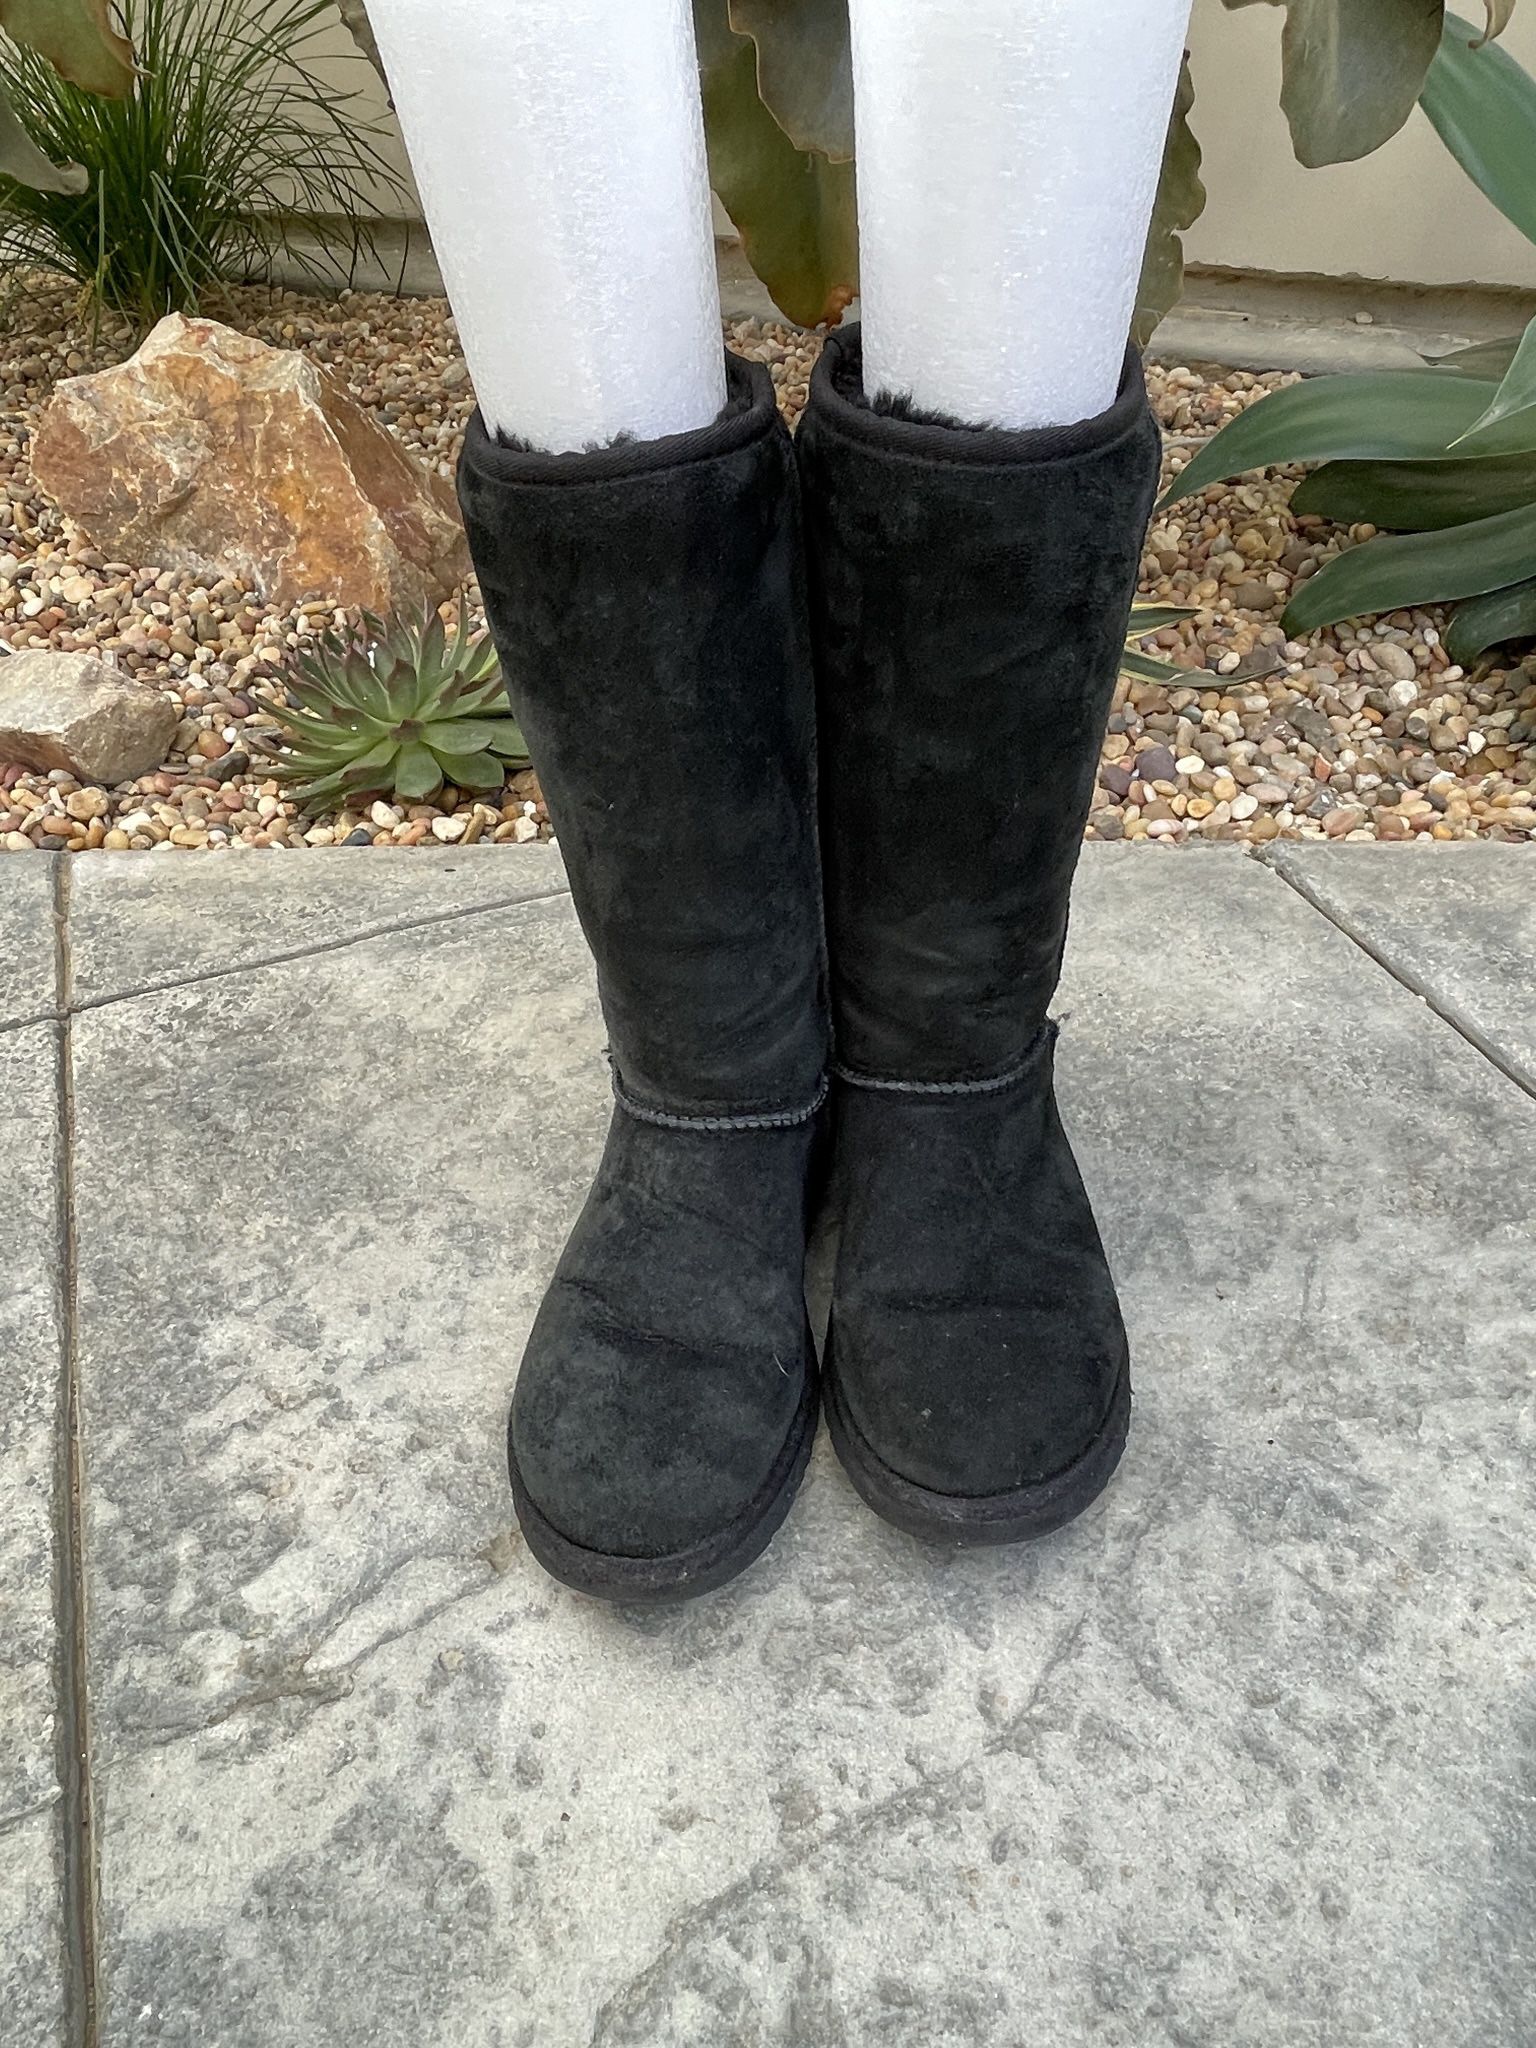 UGG boots For Women, Size 7